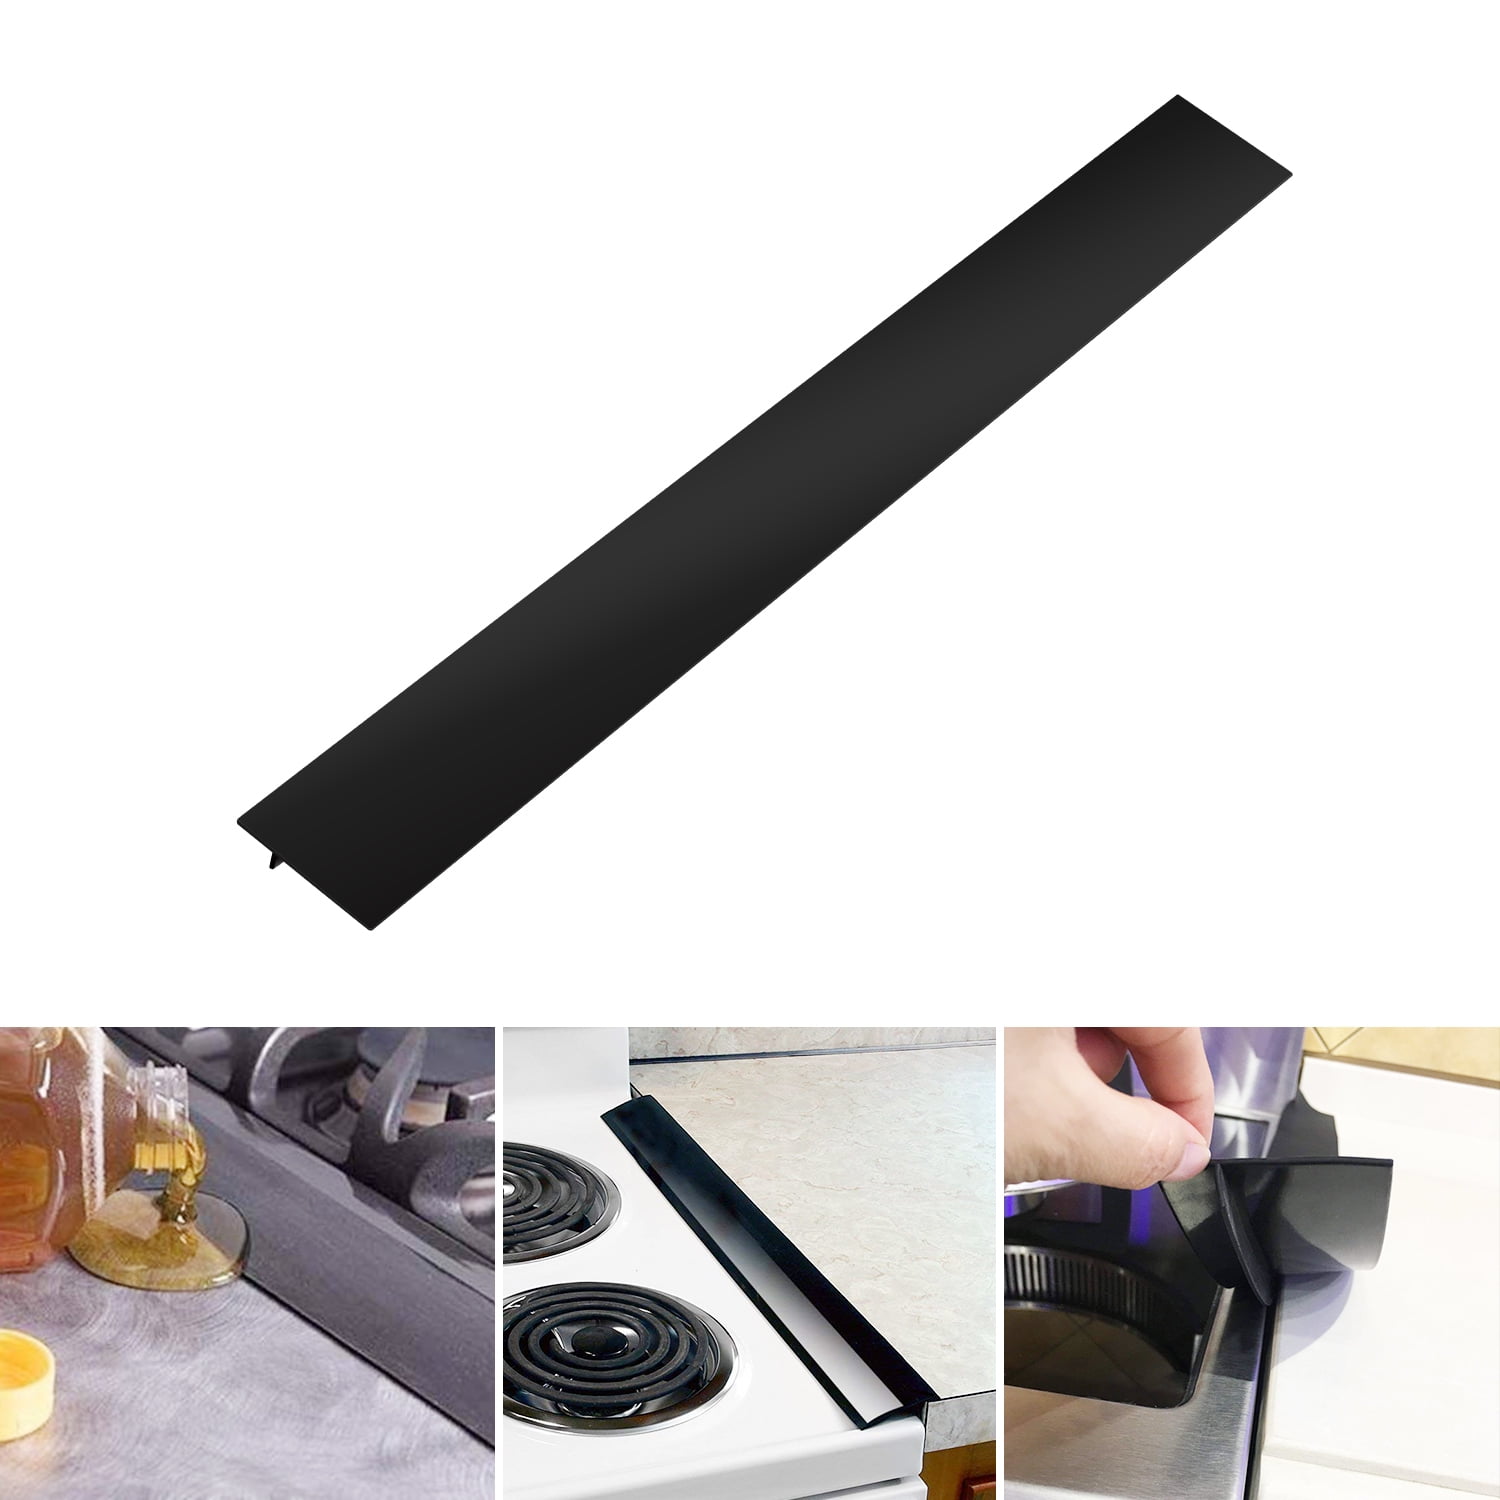 2pack Silicone Kitchen Stove Counter Gap Cover Oven Guard Spill Seal Slit Filler 